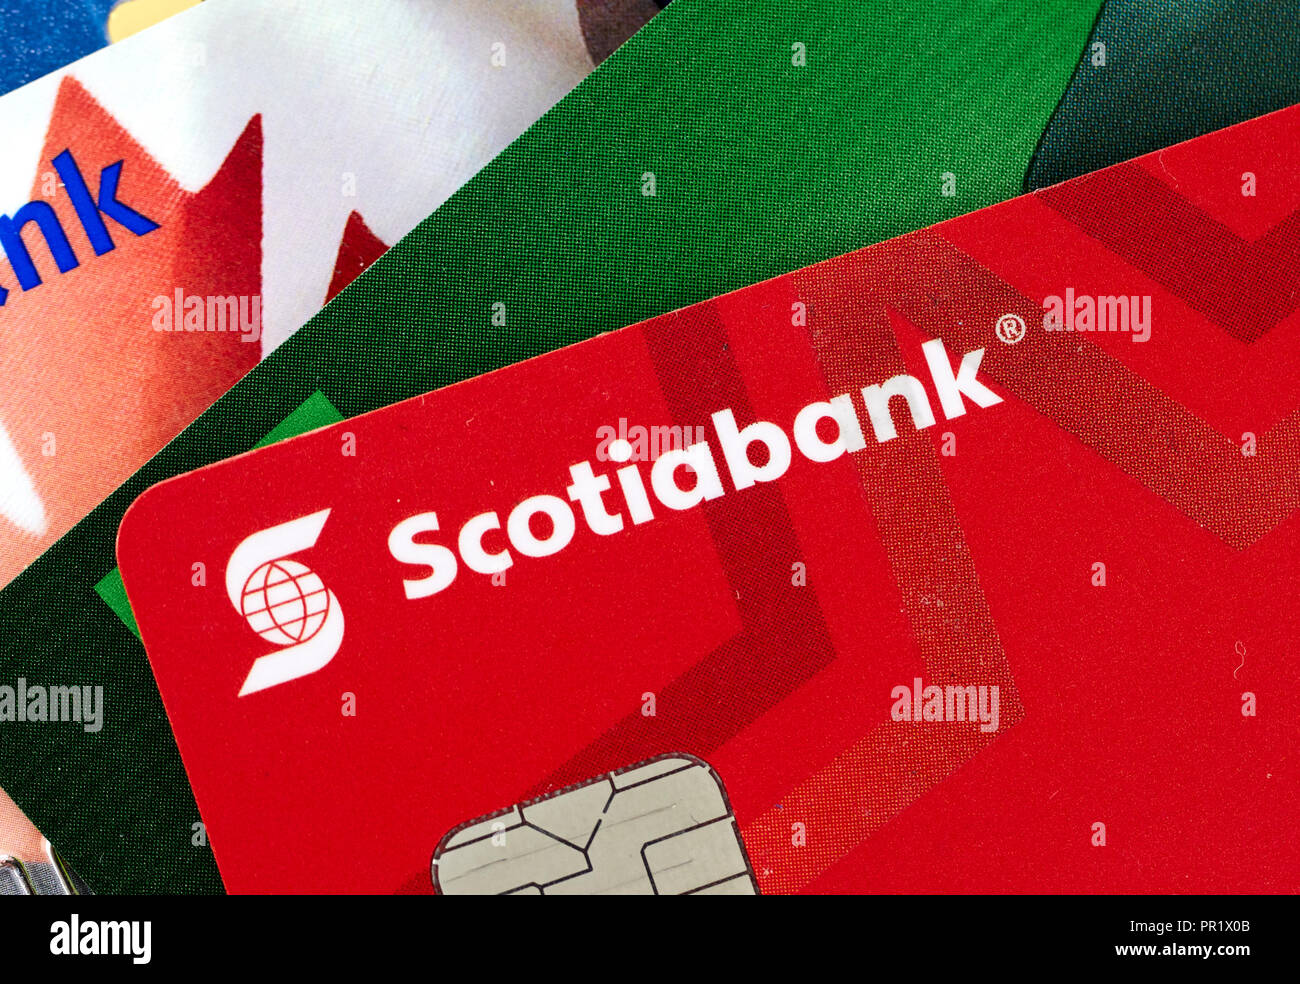 Montreal Canada September 21 2018 Scotiabank Credit Cards Close Up Picture The Bank Of Nova Scotia Is A Canadian Multinational Bank Stock Photo Alamy